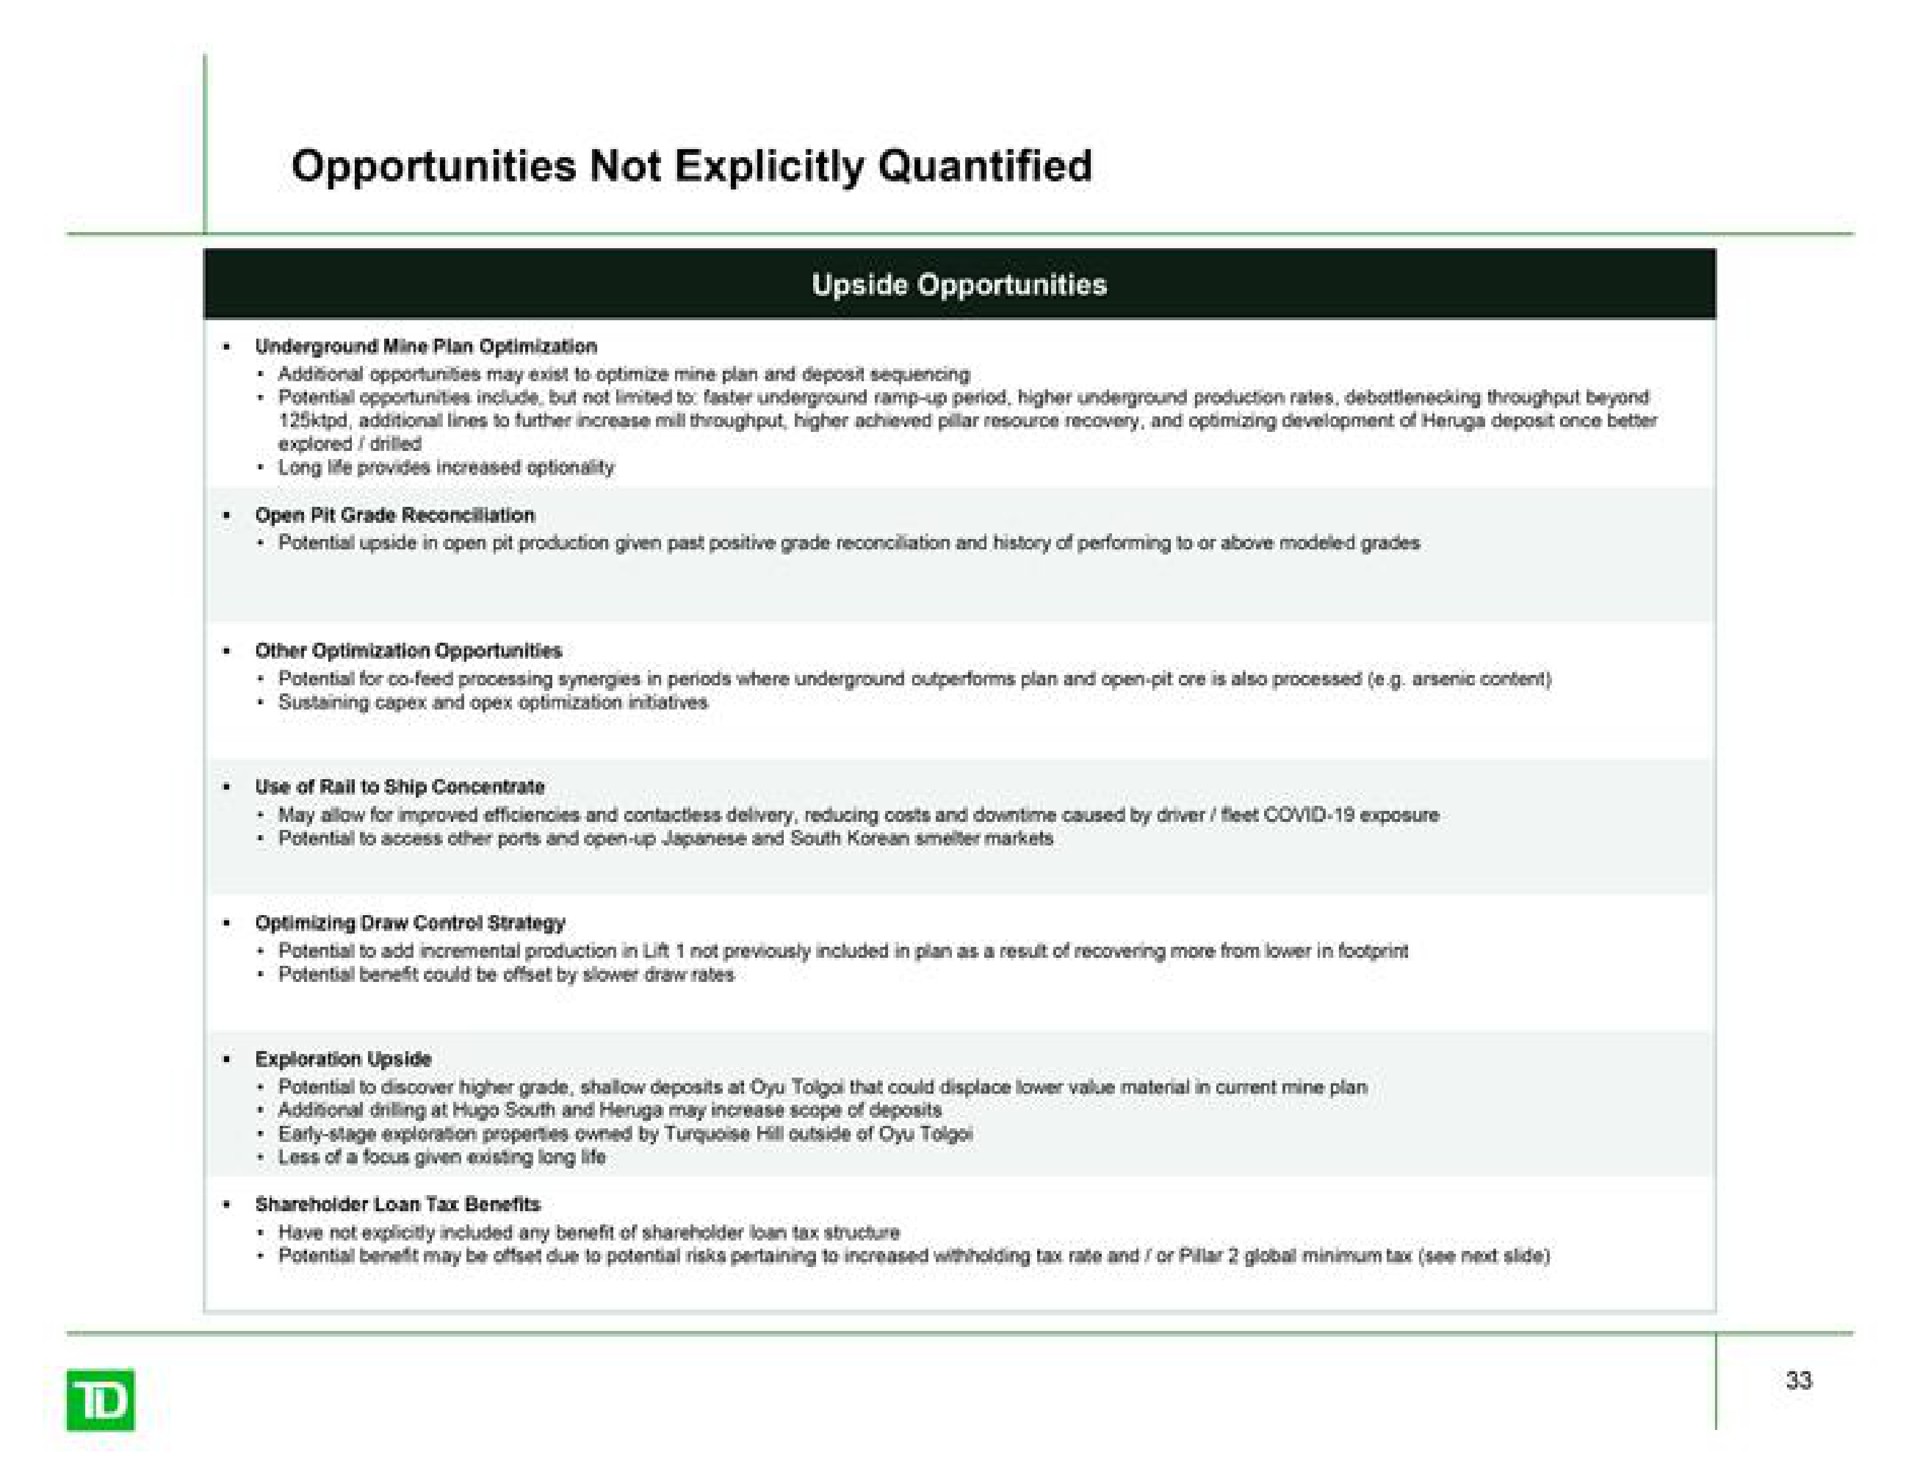 opportunities not explicitly quantified | TD Securities